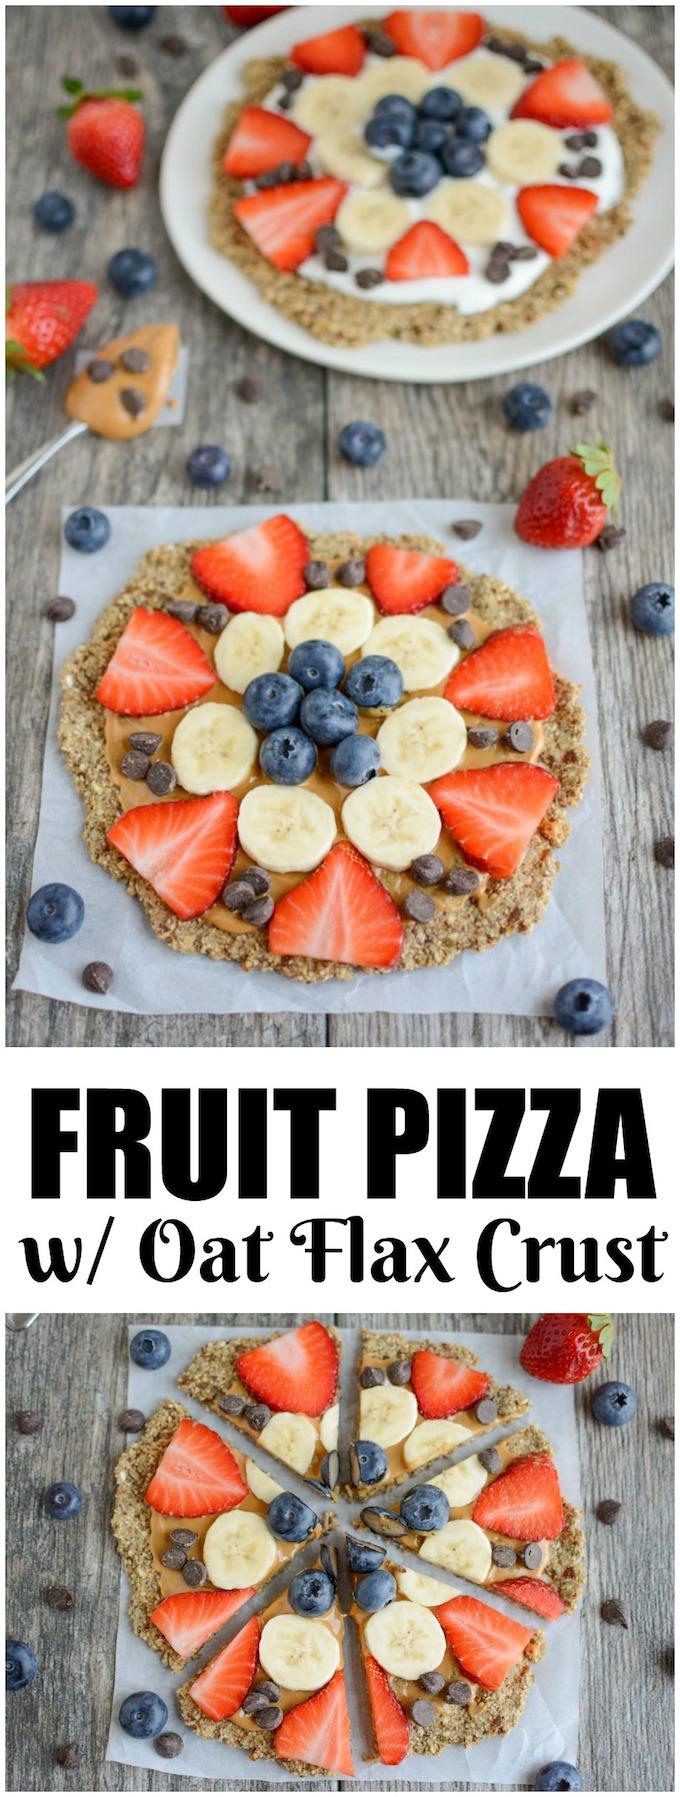 This Fruit Pizza with Oatmeal Flax Crust is packed with fiber and so easy to make. Let everyone top this kid-friendly breakfast or snack recipe with their favorite nut butter, yogurt and fruit!